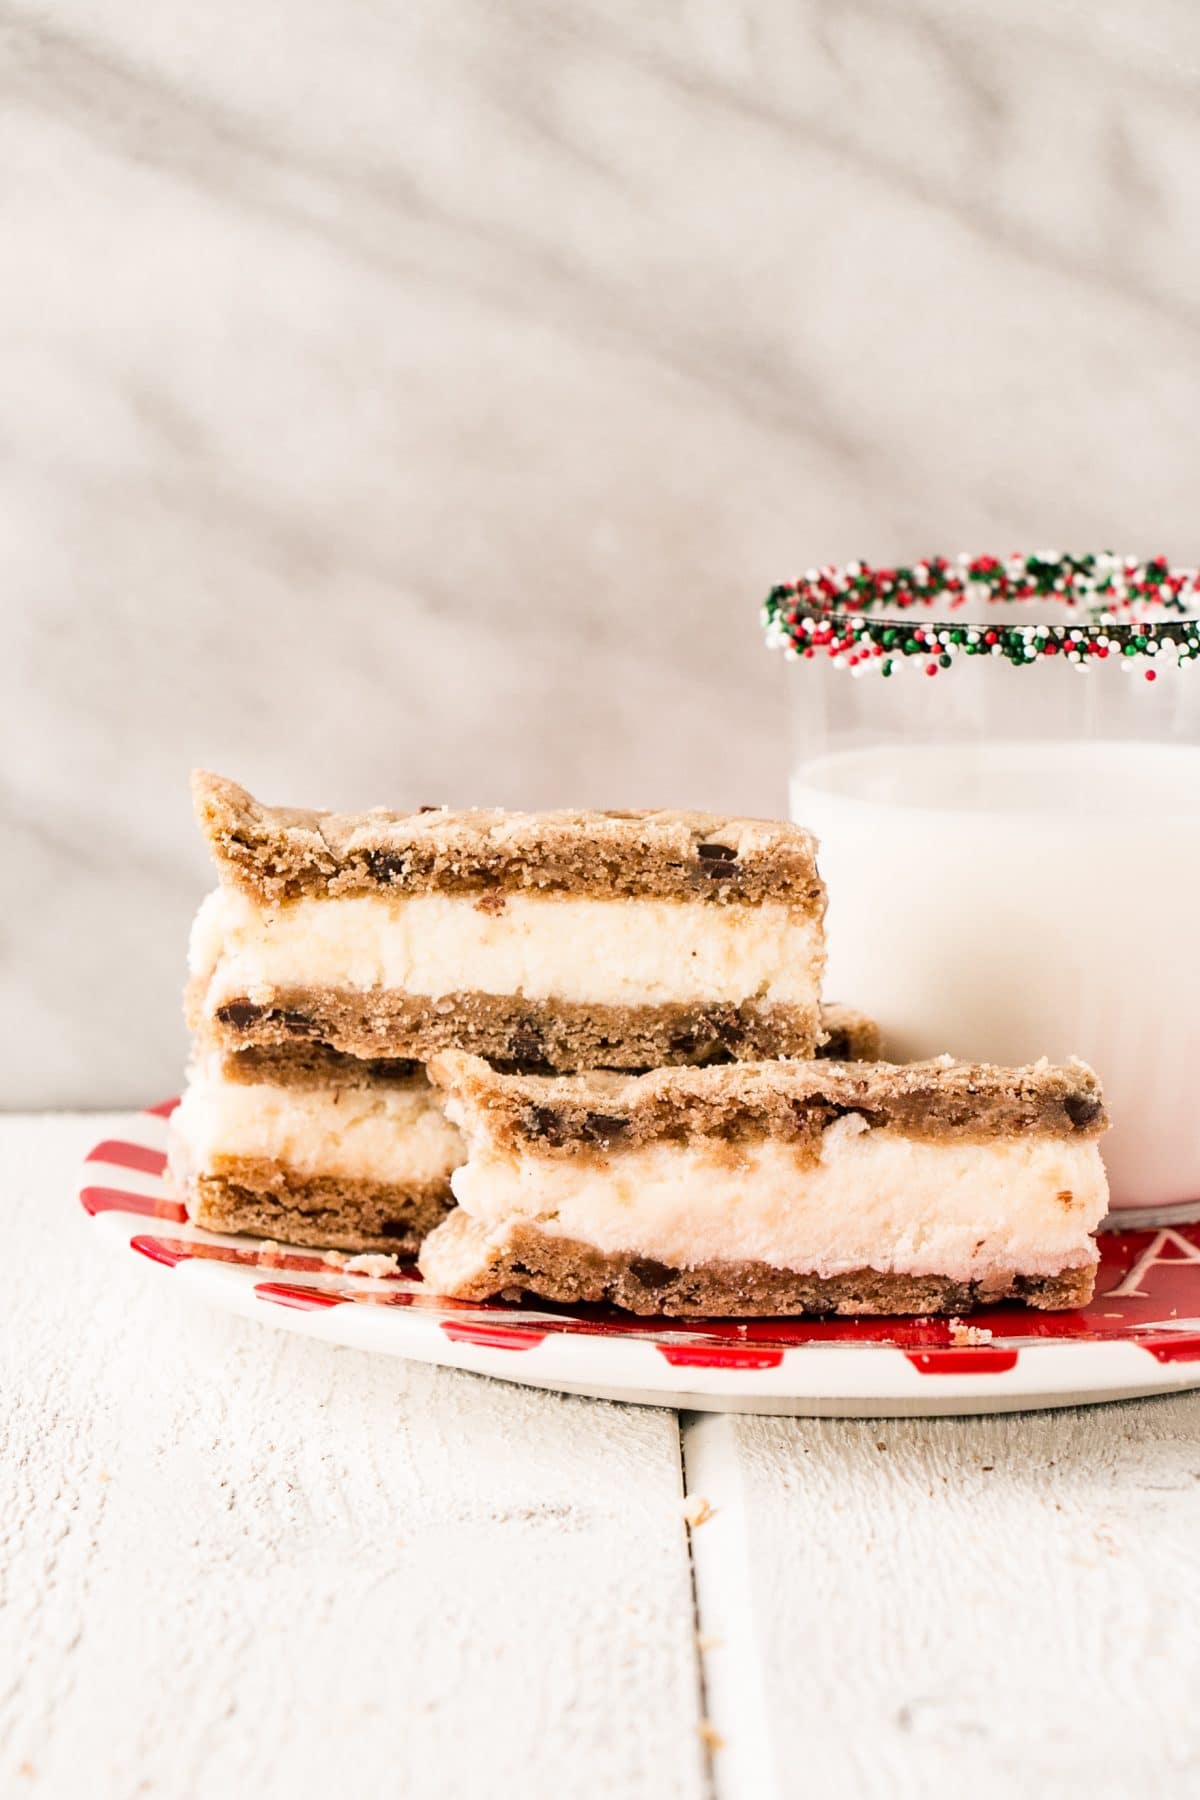 Milk and Cookie Bars (for Santa!) are easy to whip up and set a tradition on Christmas Eve. #ad #qualitymilk #christmas #milkandcookies